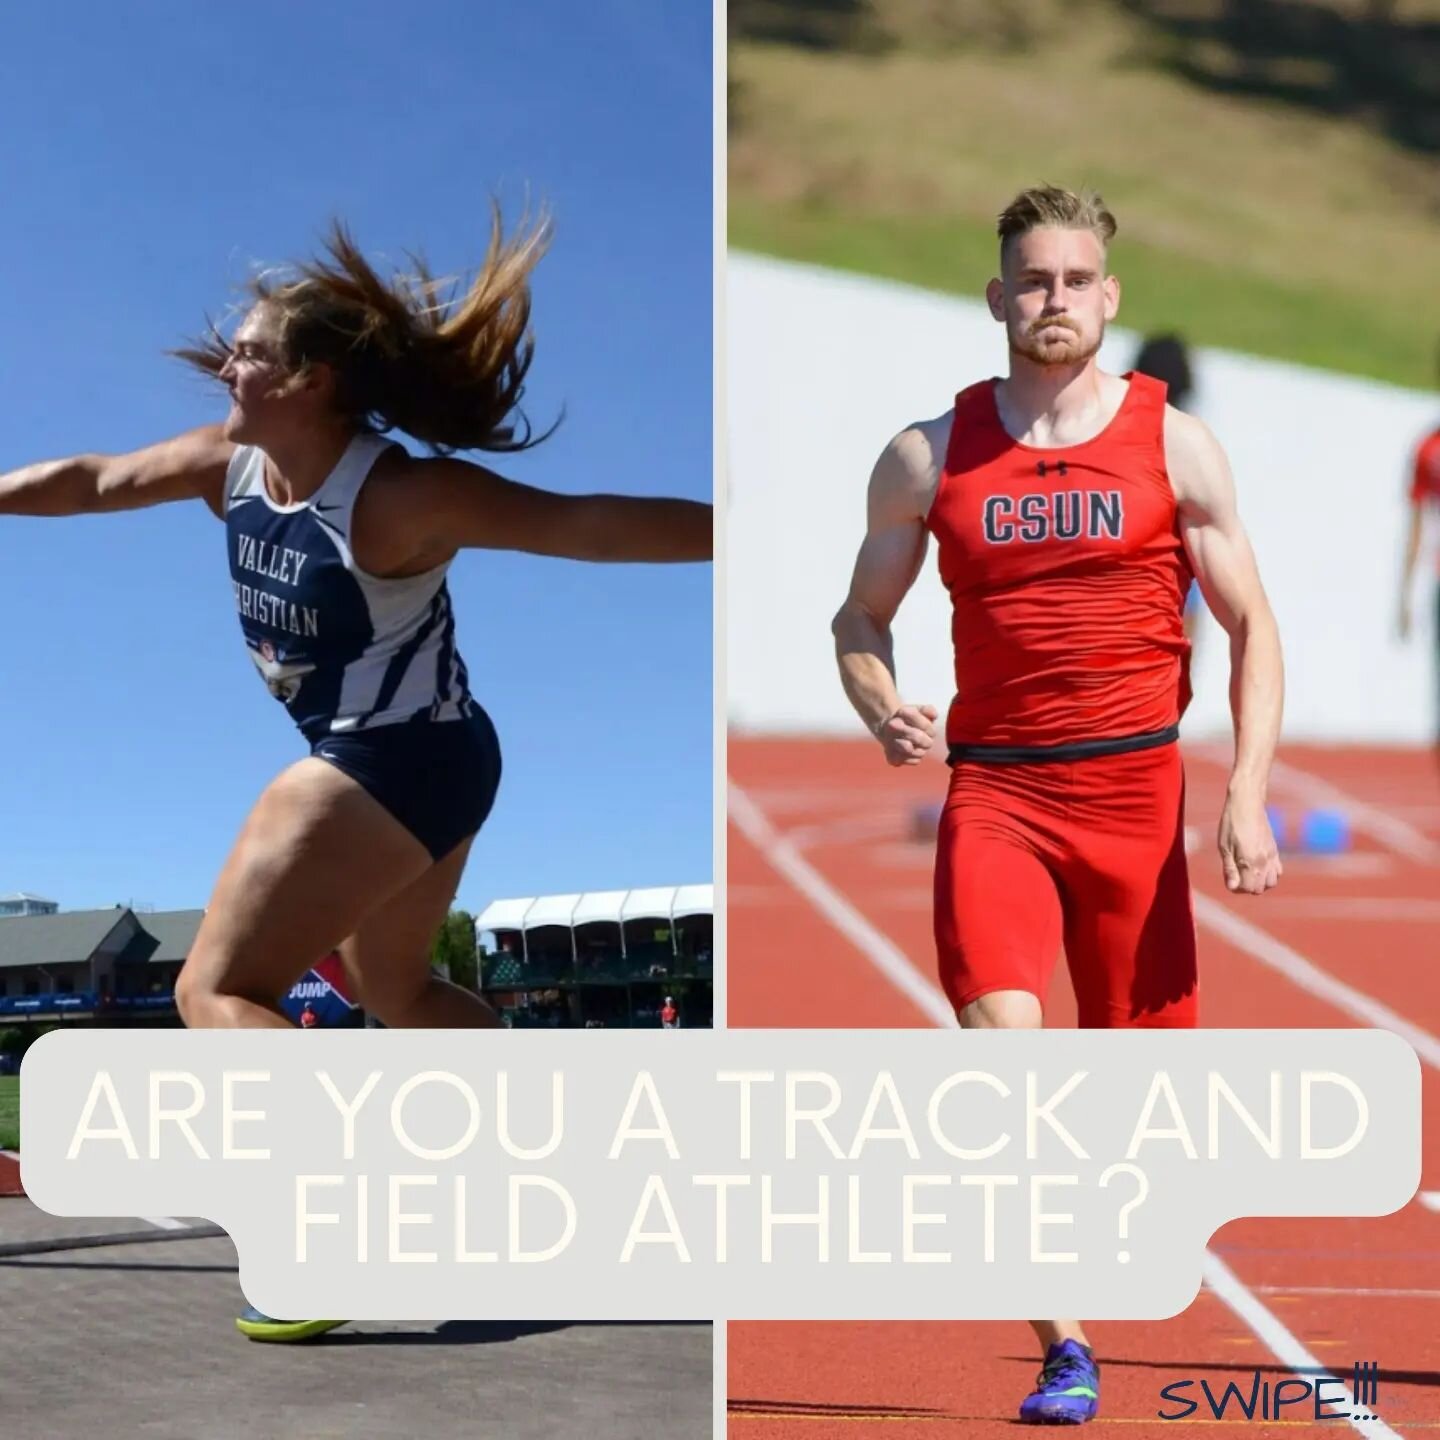 TRACK &amp; FIELD || Are you a track and field athlete wanting to compete at college in the USA? Swipe to see some facts about the program numbers and divisions. 
Schedule your free consultation today! 
.
.
.
.
.
#college #collegesports #trackandfiel